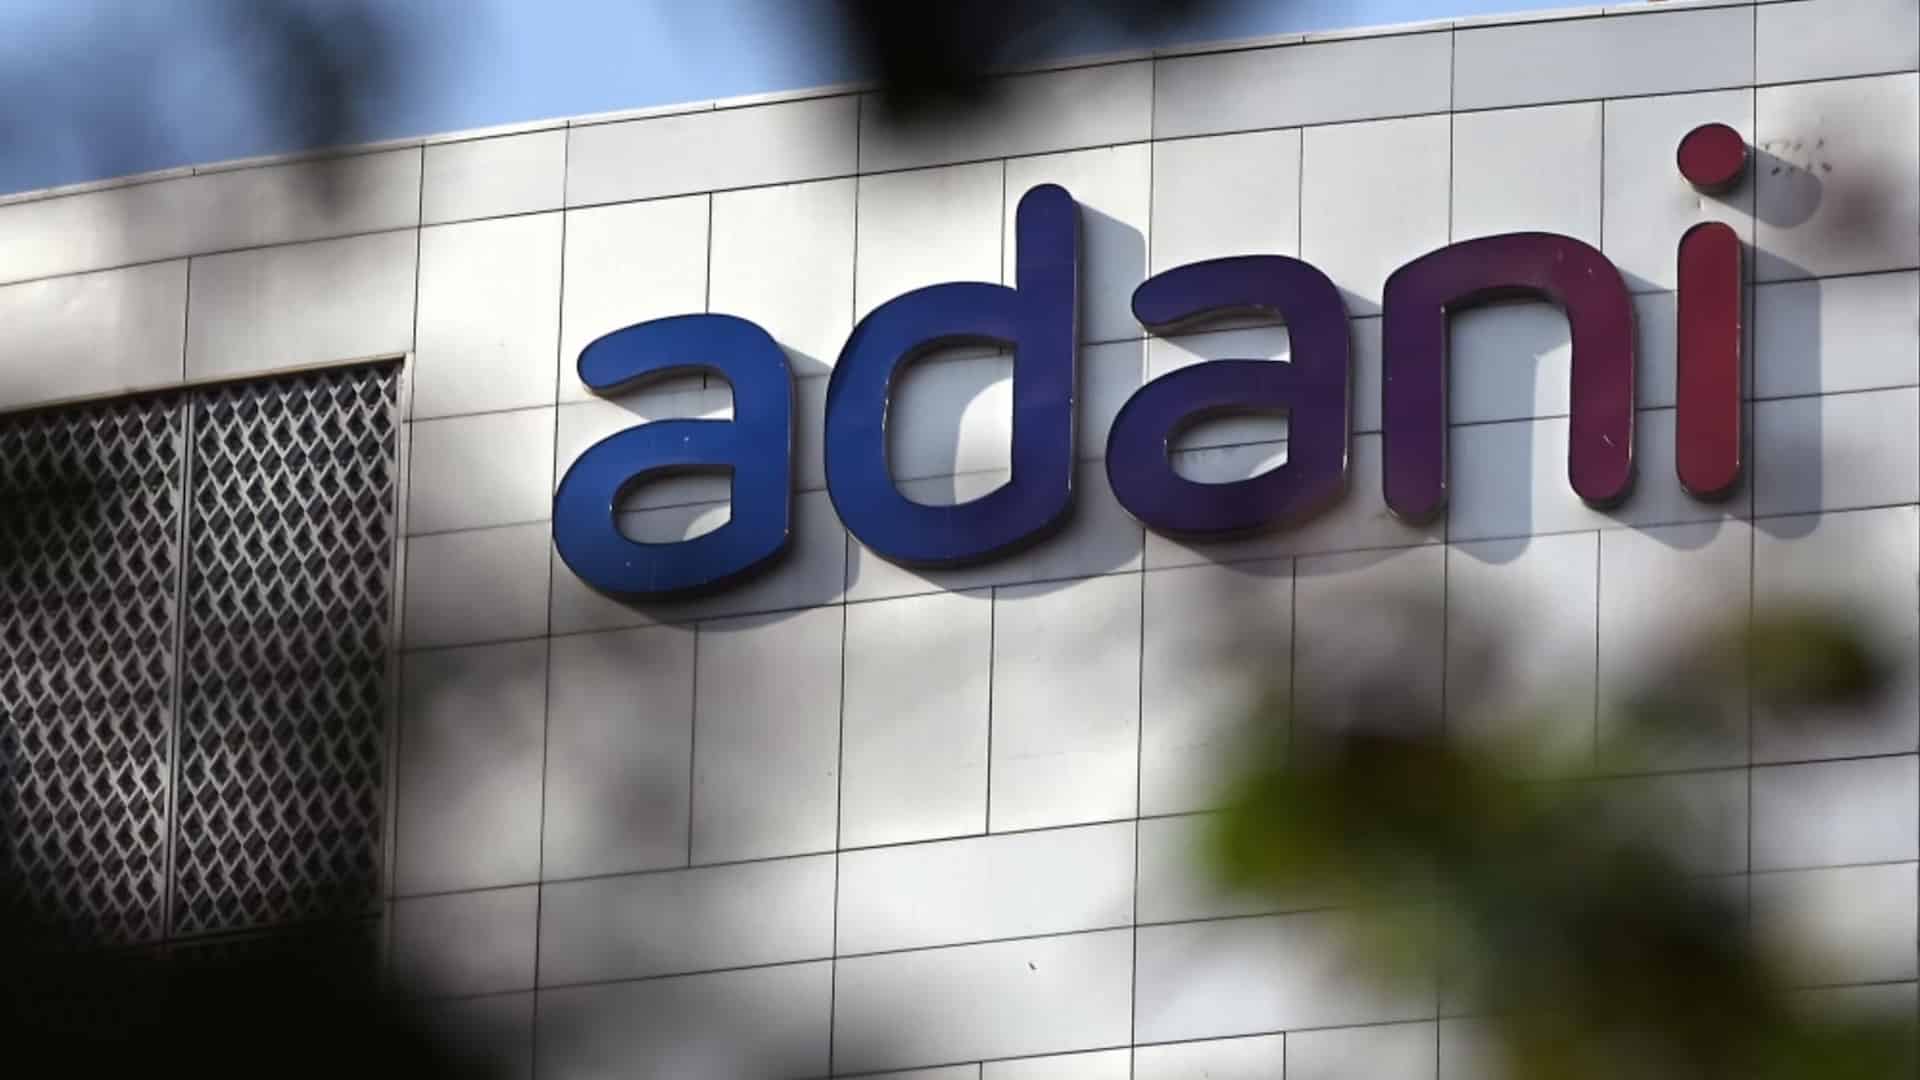 Adani Group's $1.2 Billion Copper Plant To Boost India's Metal Production